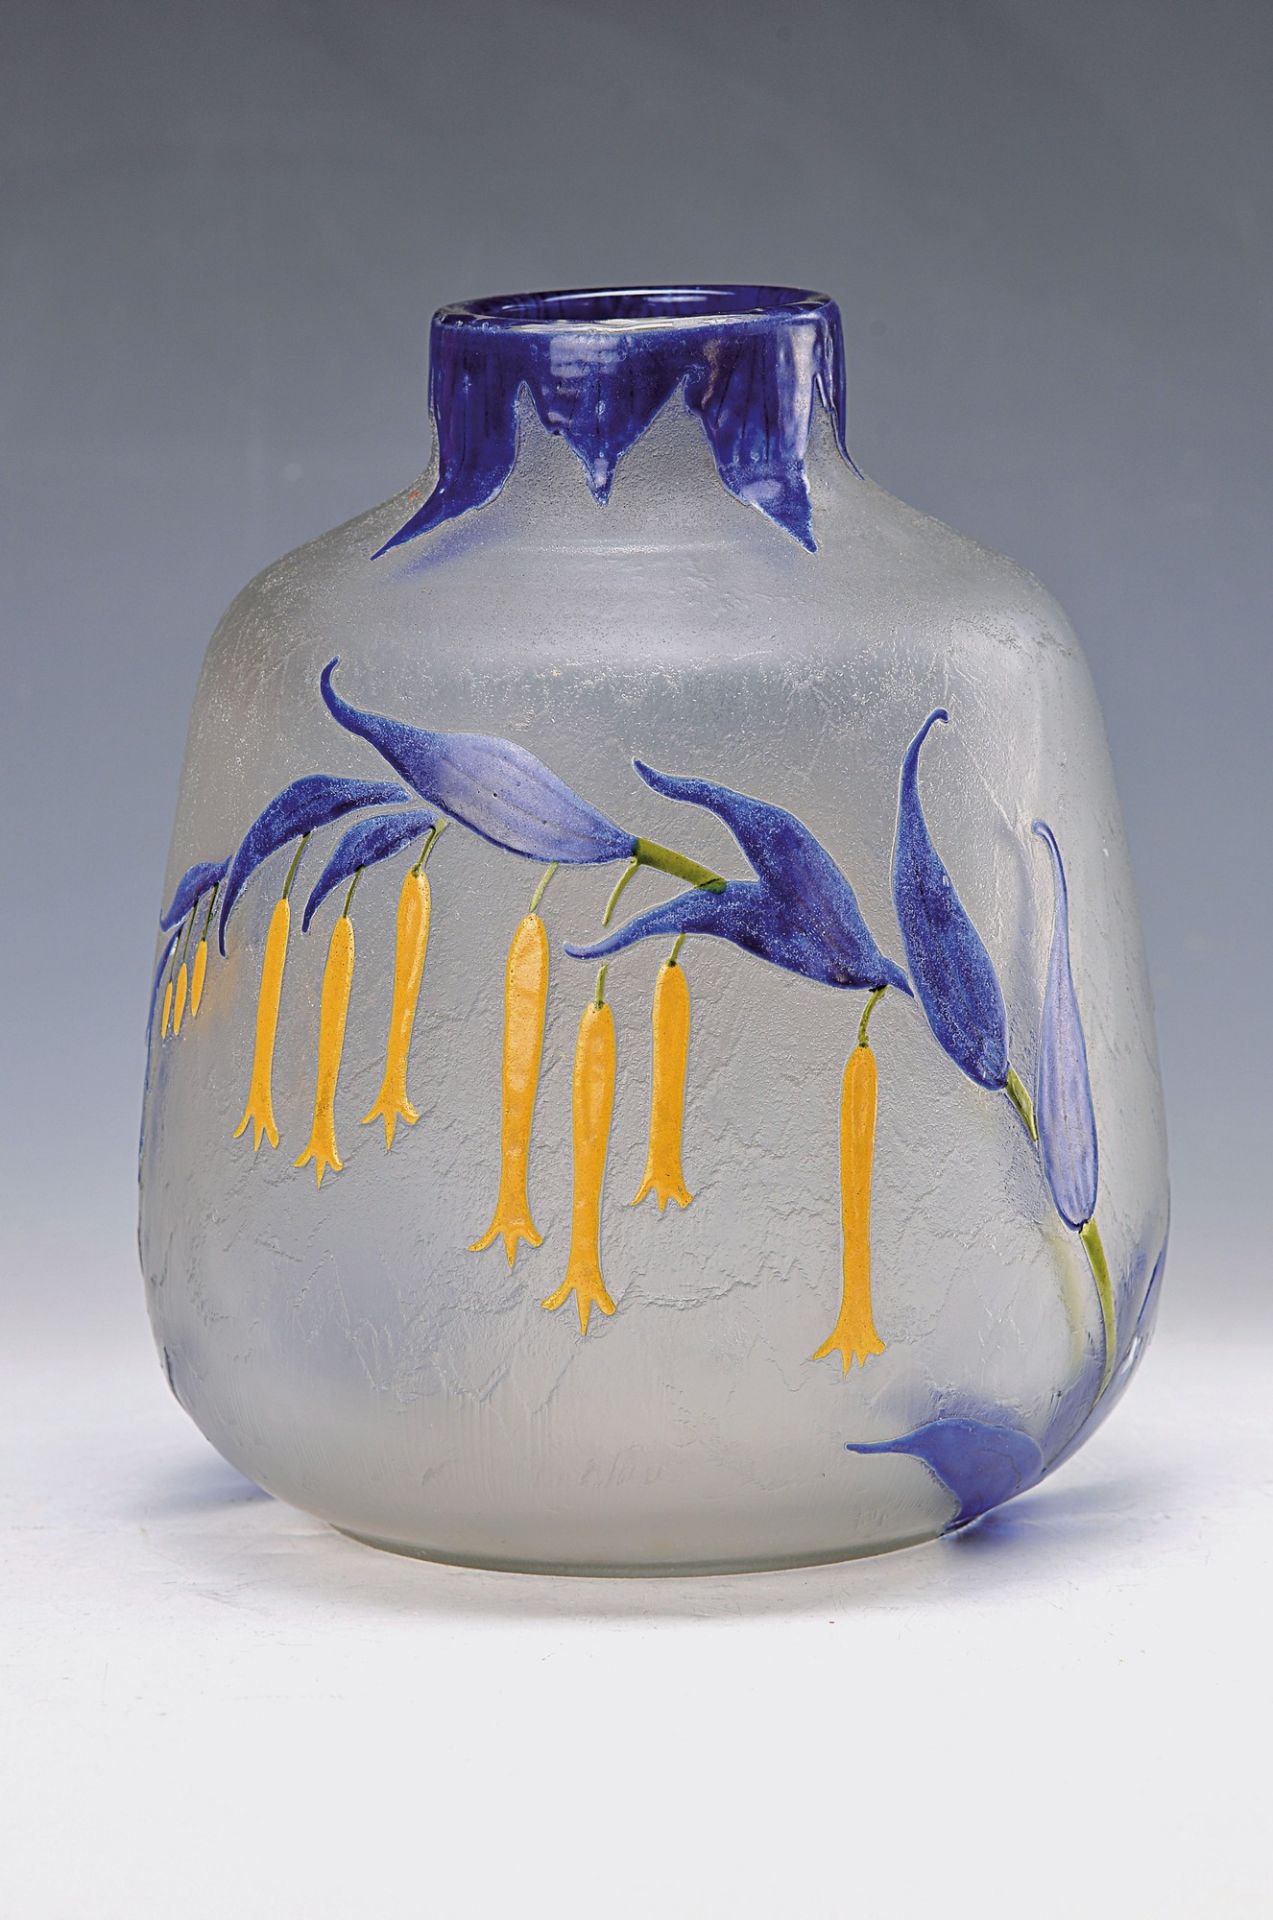 vase, Legras, 1920s, colourless etched glass, blue and yellow floral enamel decor, signed, H.